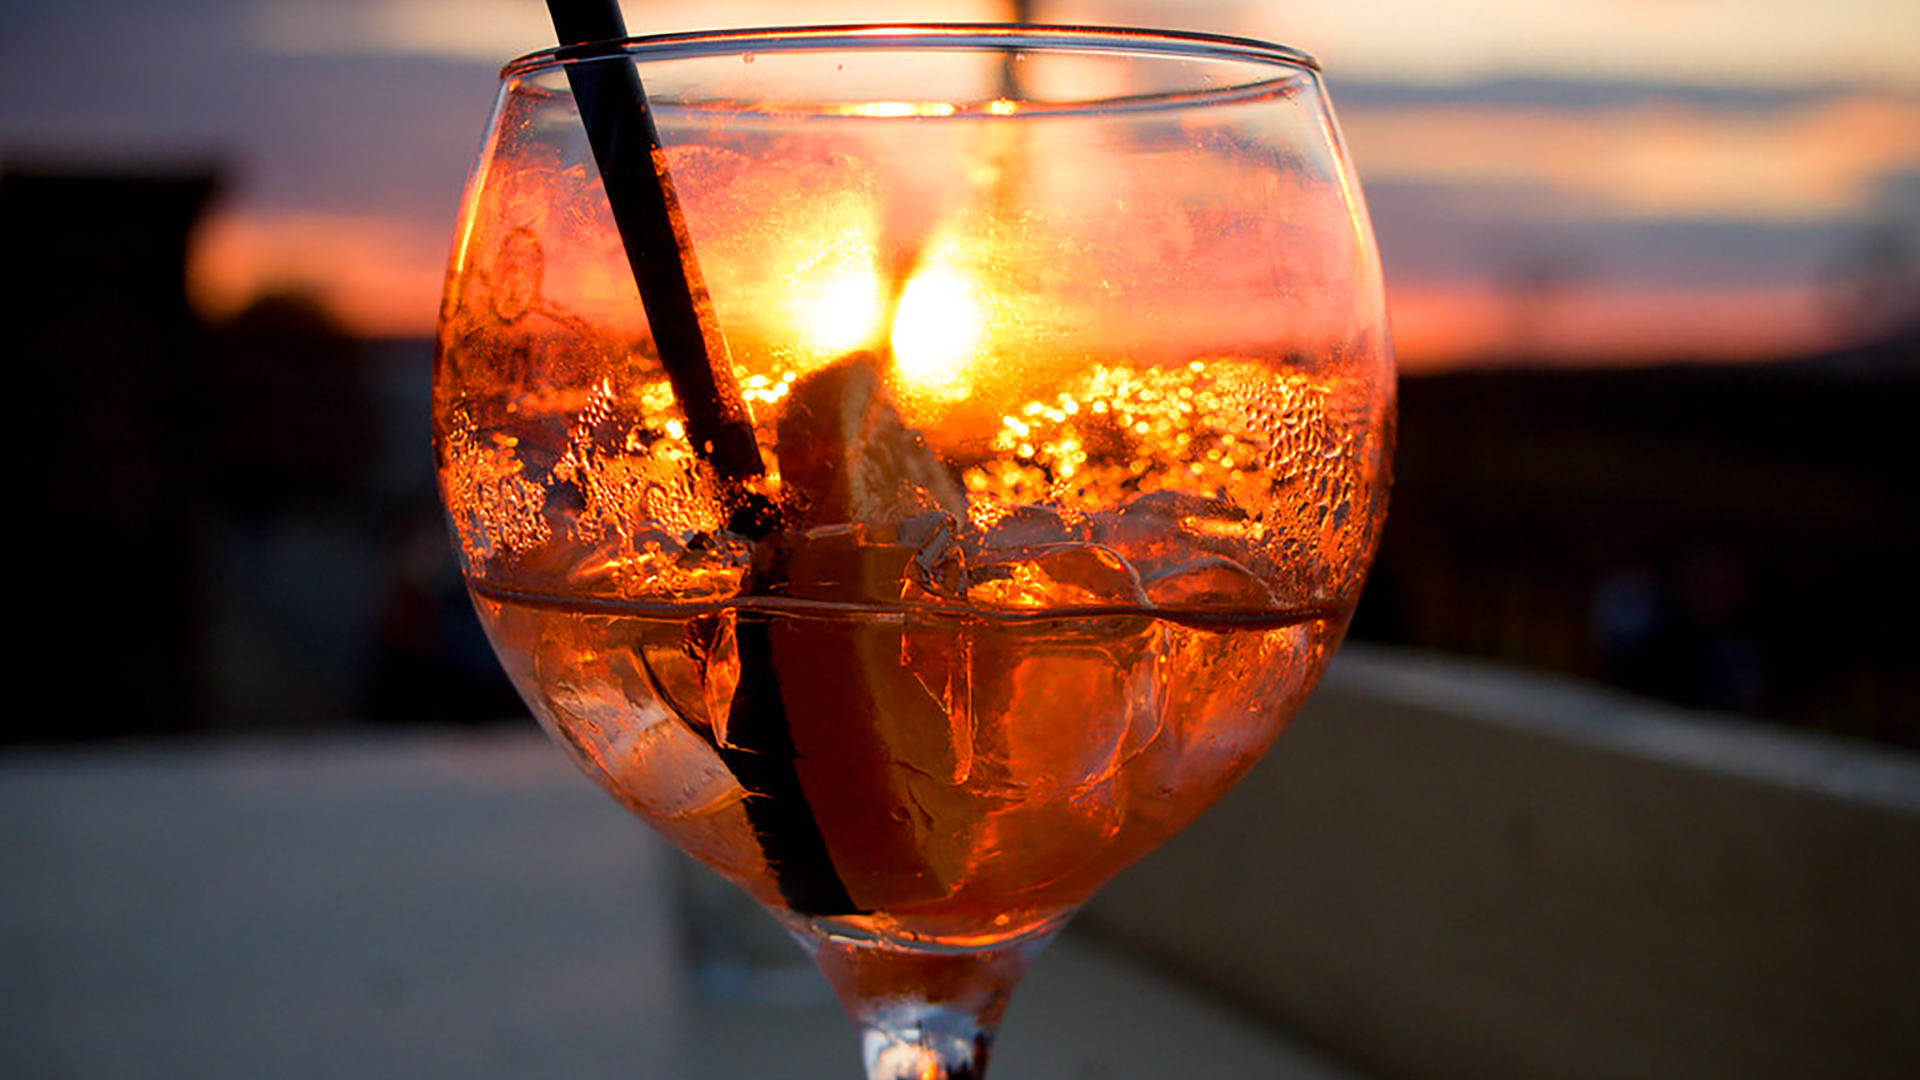 A golden sunset, viewed through a goblet of Aperol. With or without the alcohol - your choice